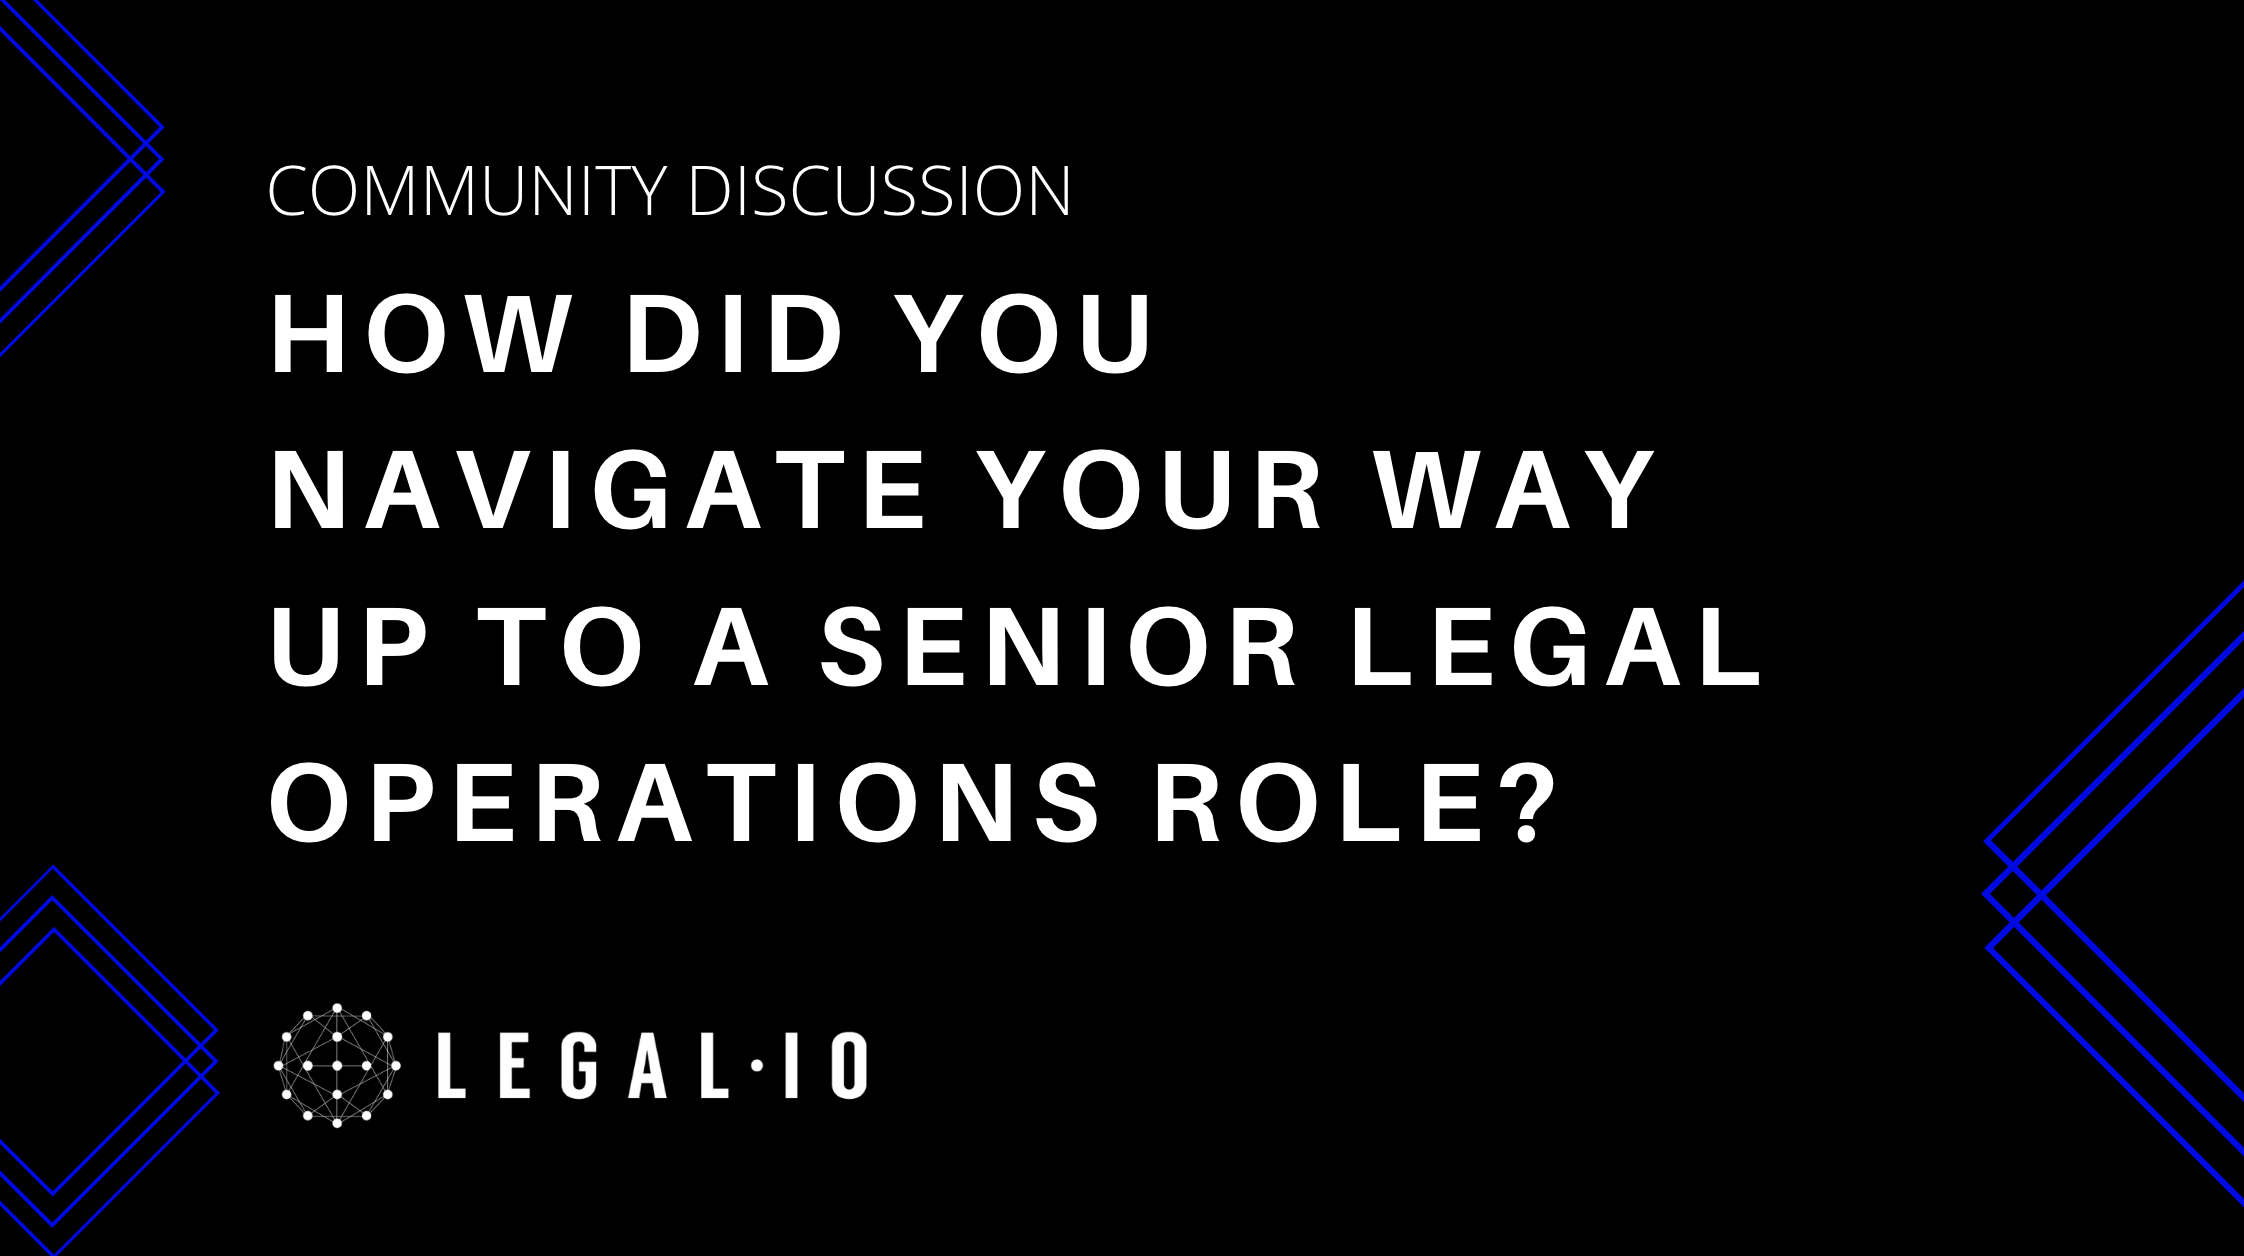 Community Discussion: How did you navigate your way up to a senior legal operations role?